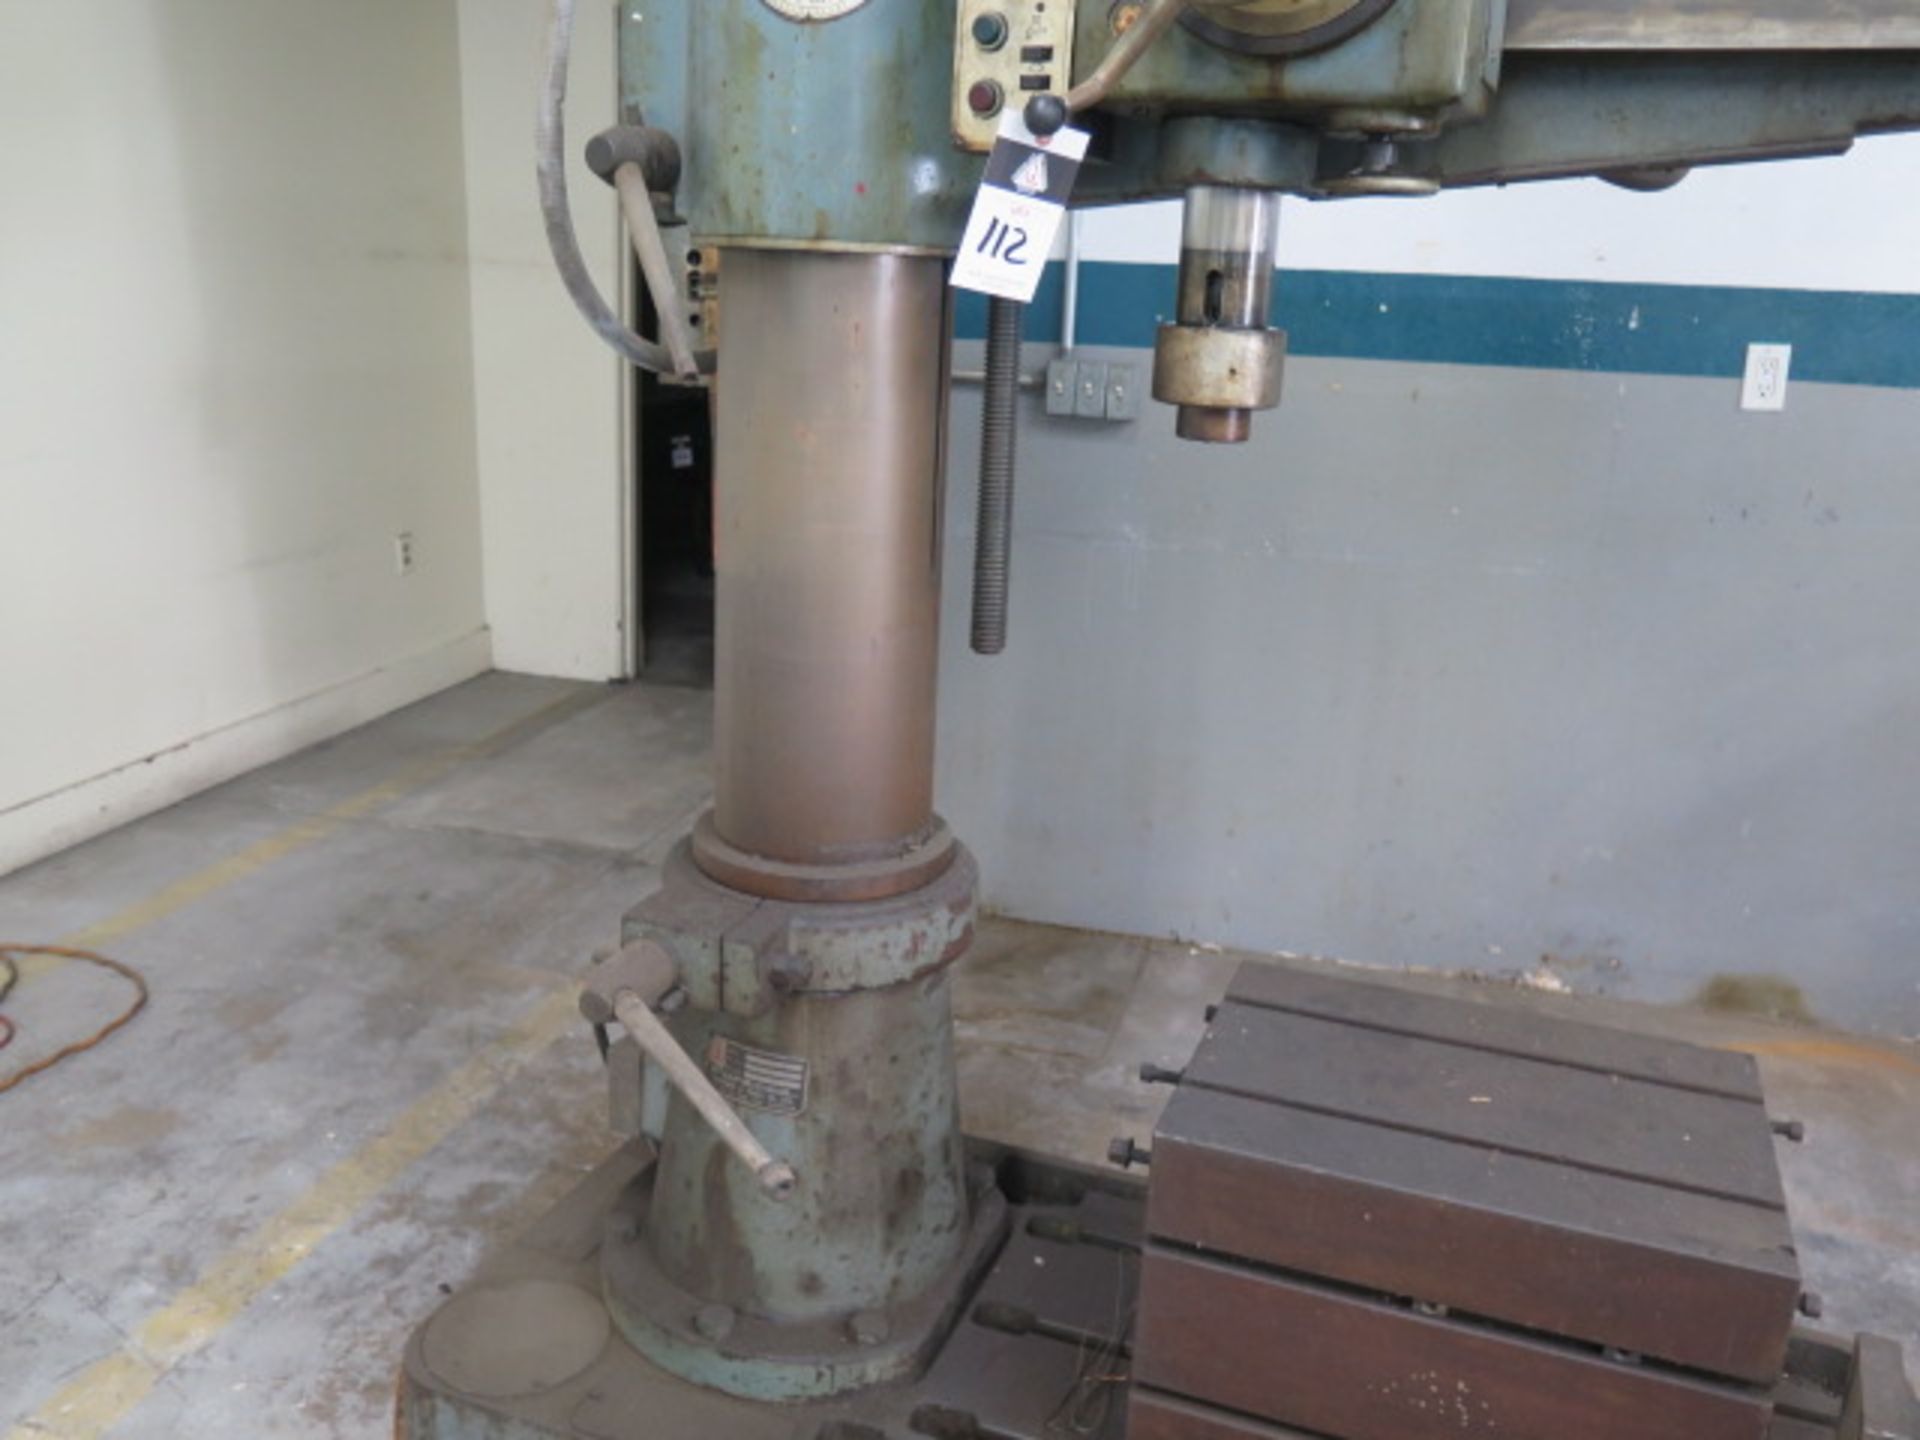 Fortech FMR-915 8” Column x 24” Radial Arm Drill s/n 166 w/ 50-1500 RPM, Power Column and Feeds, 21” - Image 3 of 8